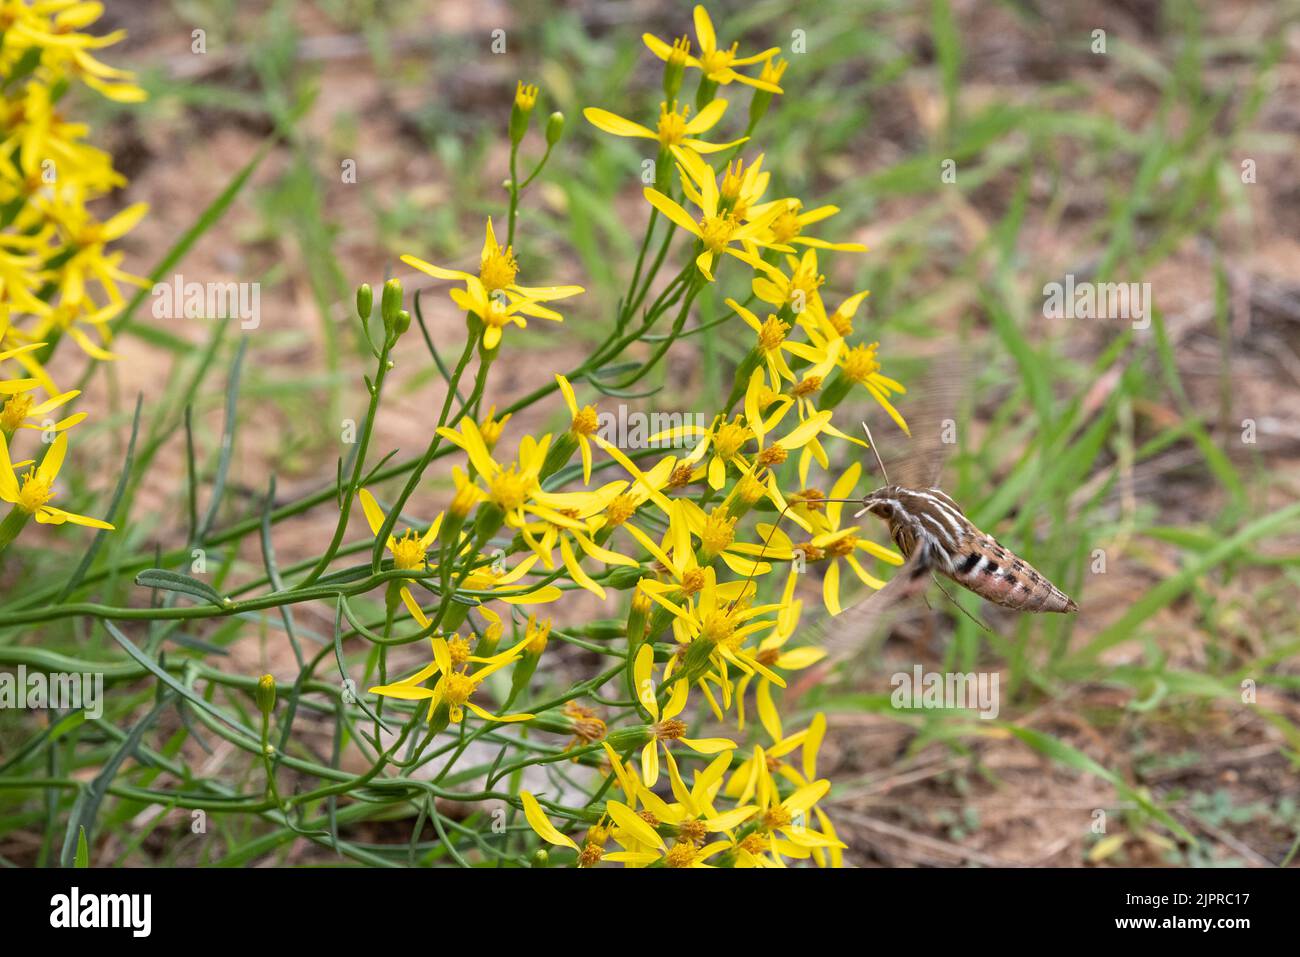 White-lined sphinx moth (Hyles lineata), Canyonlands National Park, Utah. Stock Photo